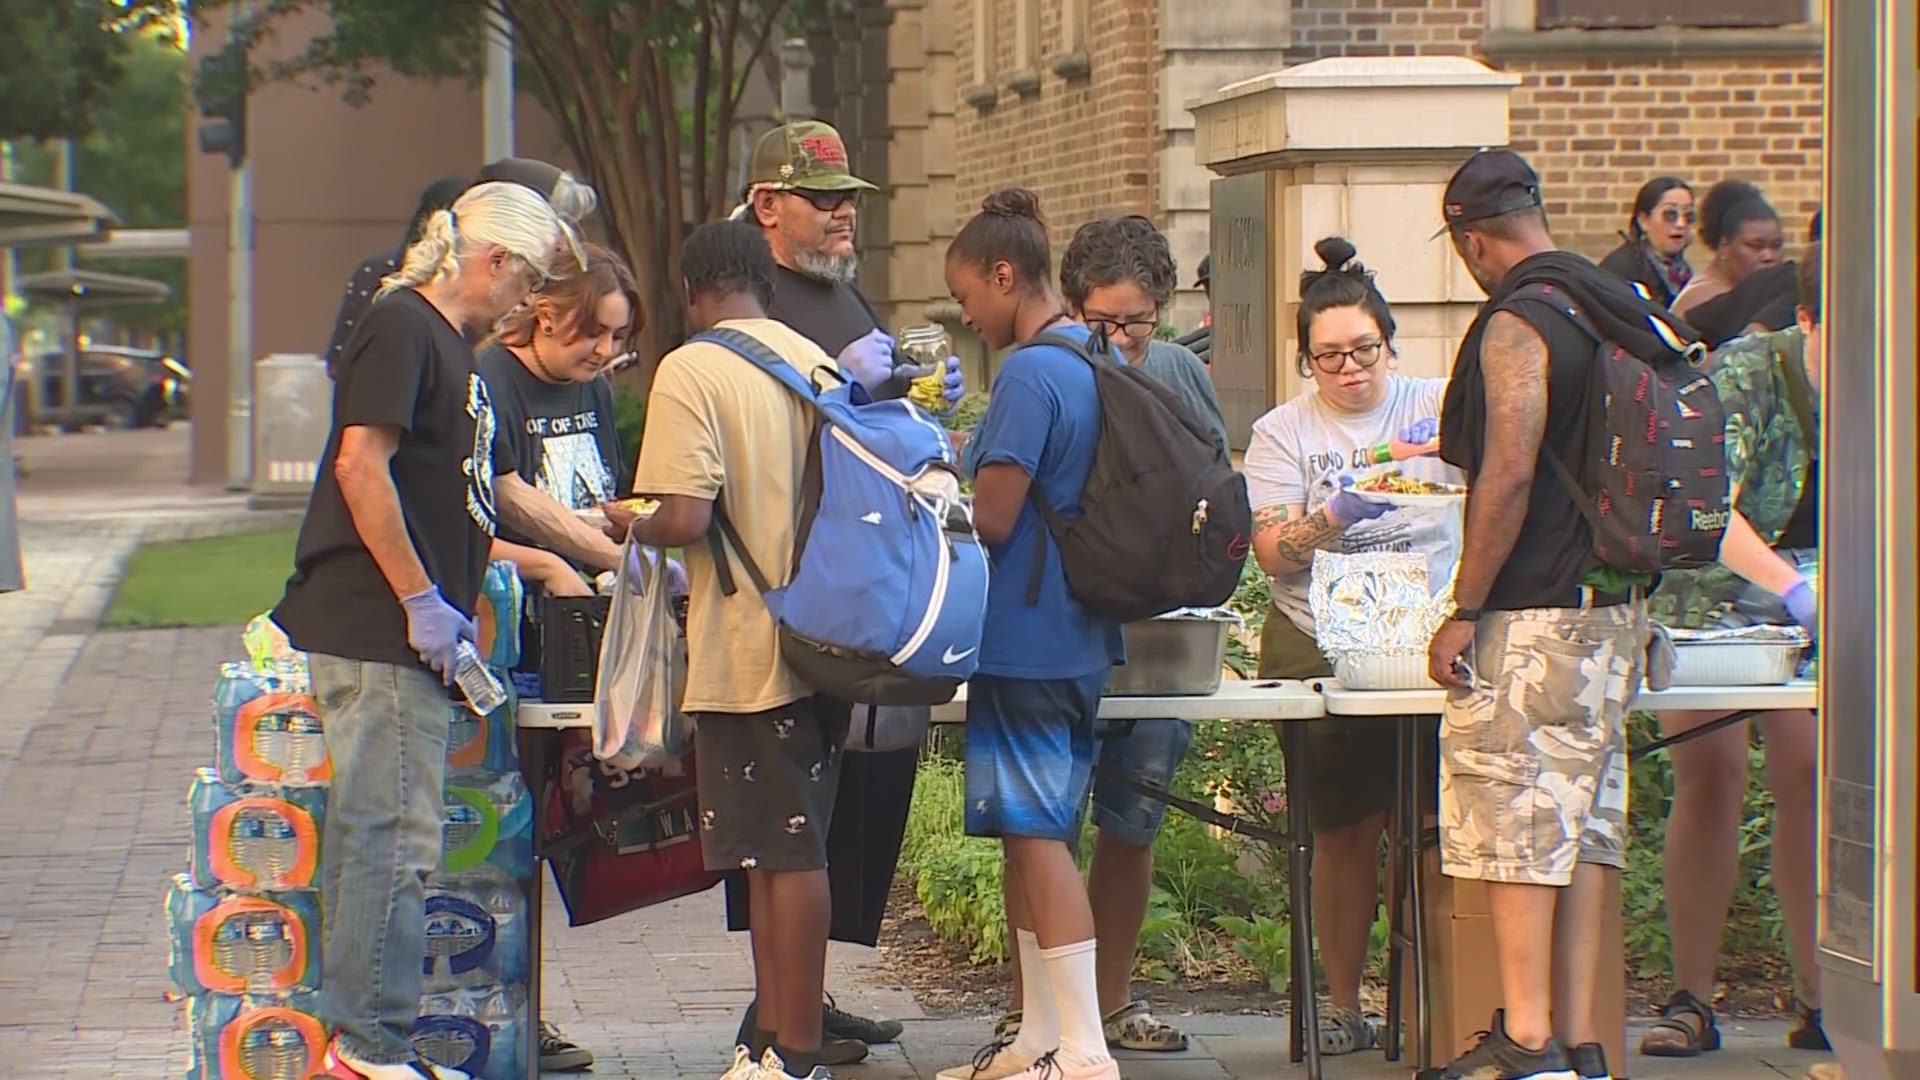 Outside the Houston Public Library, a sense of unity and pride is what motivated the dozens of volunteers who gathered with the organization "Food Not Bombs."